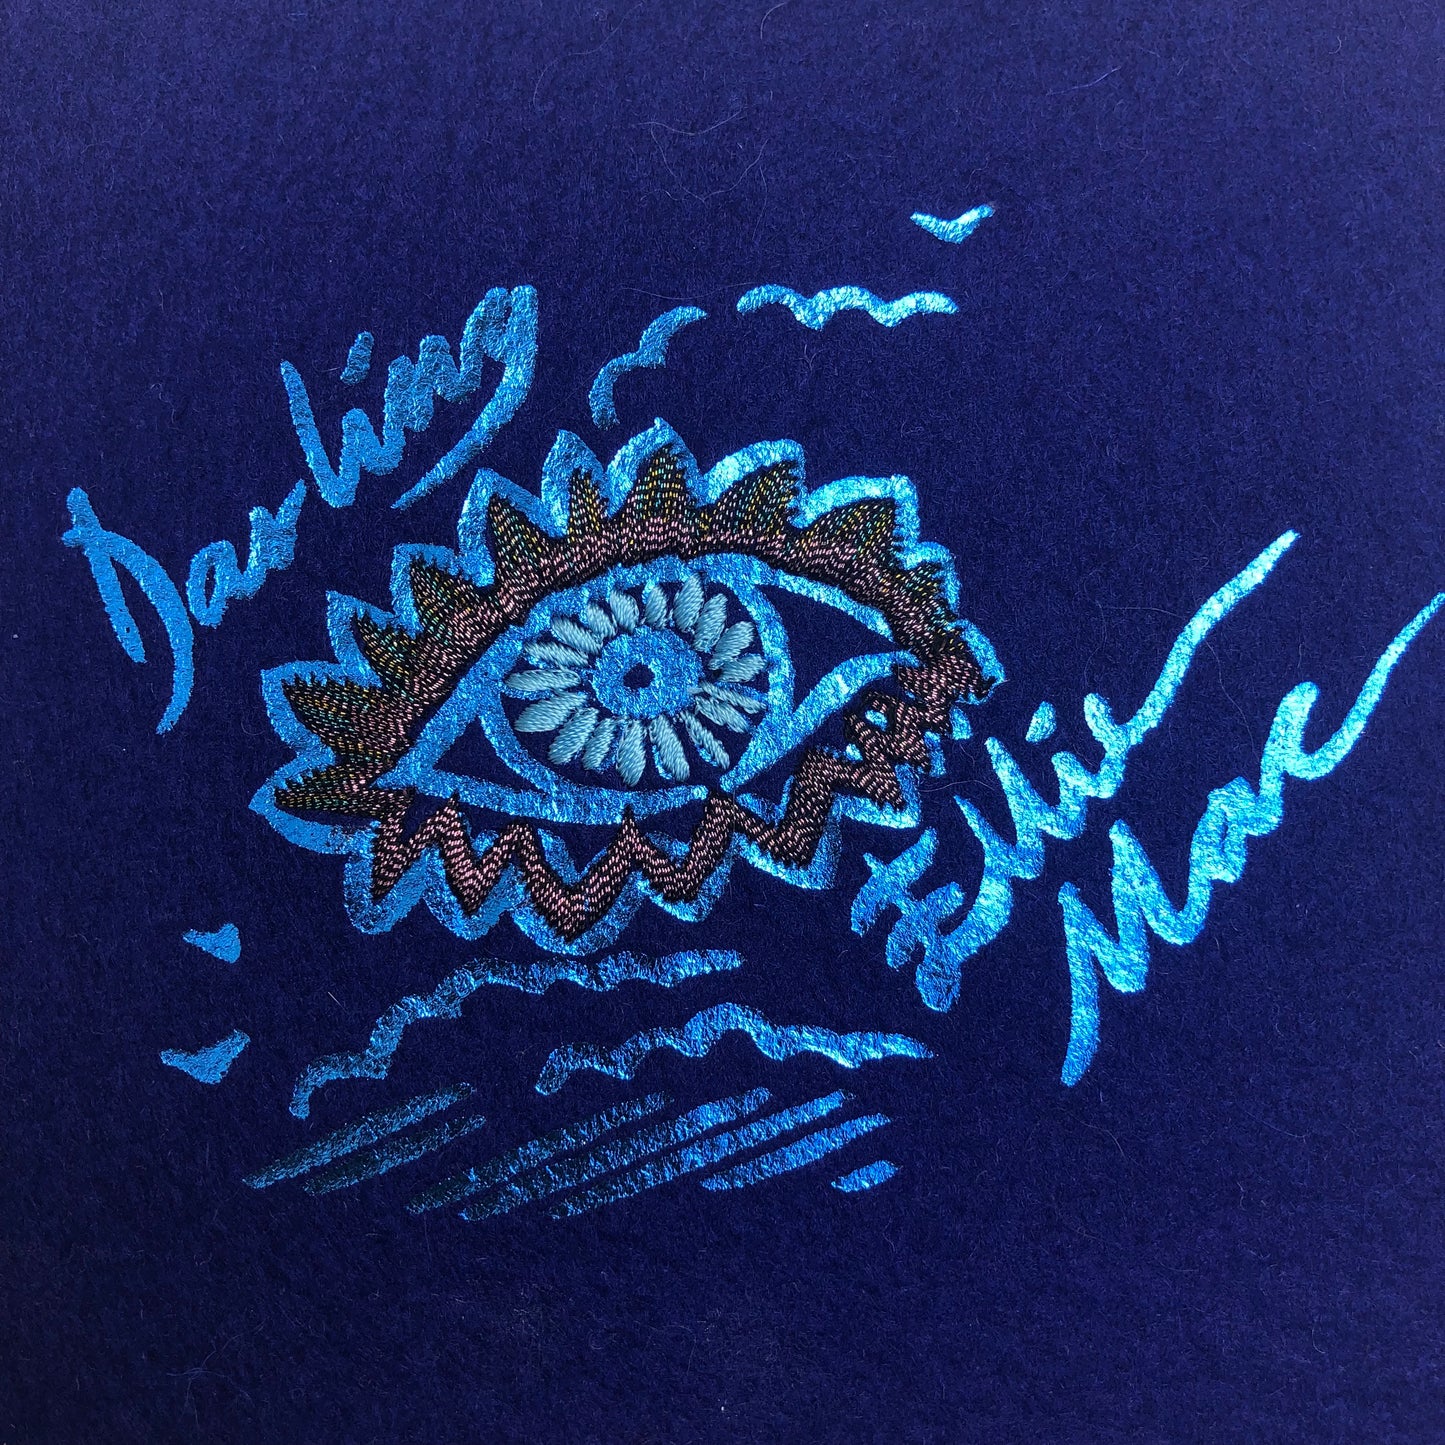 Screen printed signtures for Ellie Mac and Sophie Darling, printed in blue ink on blue felt. The signatures are above and below a printed eye with embroidered eyelash details